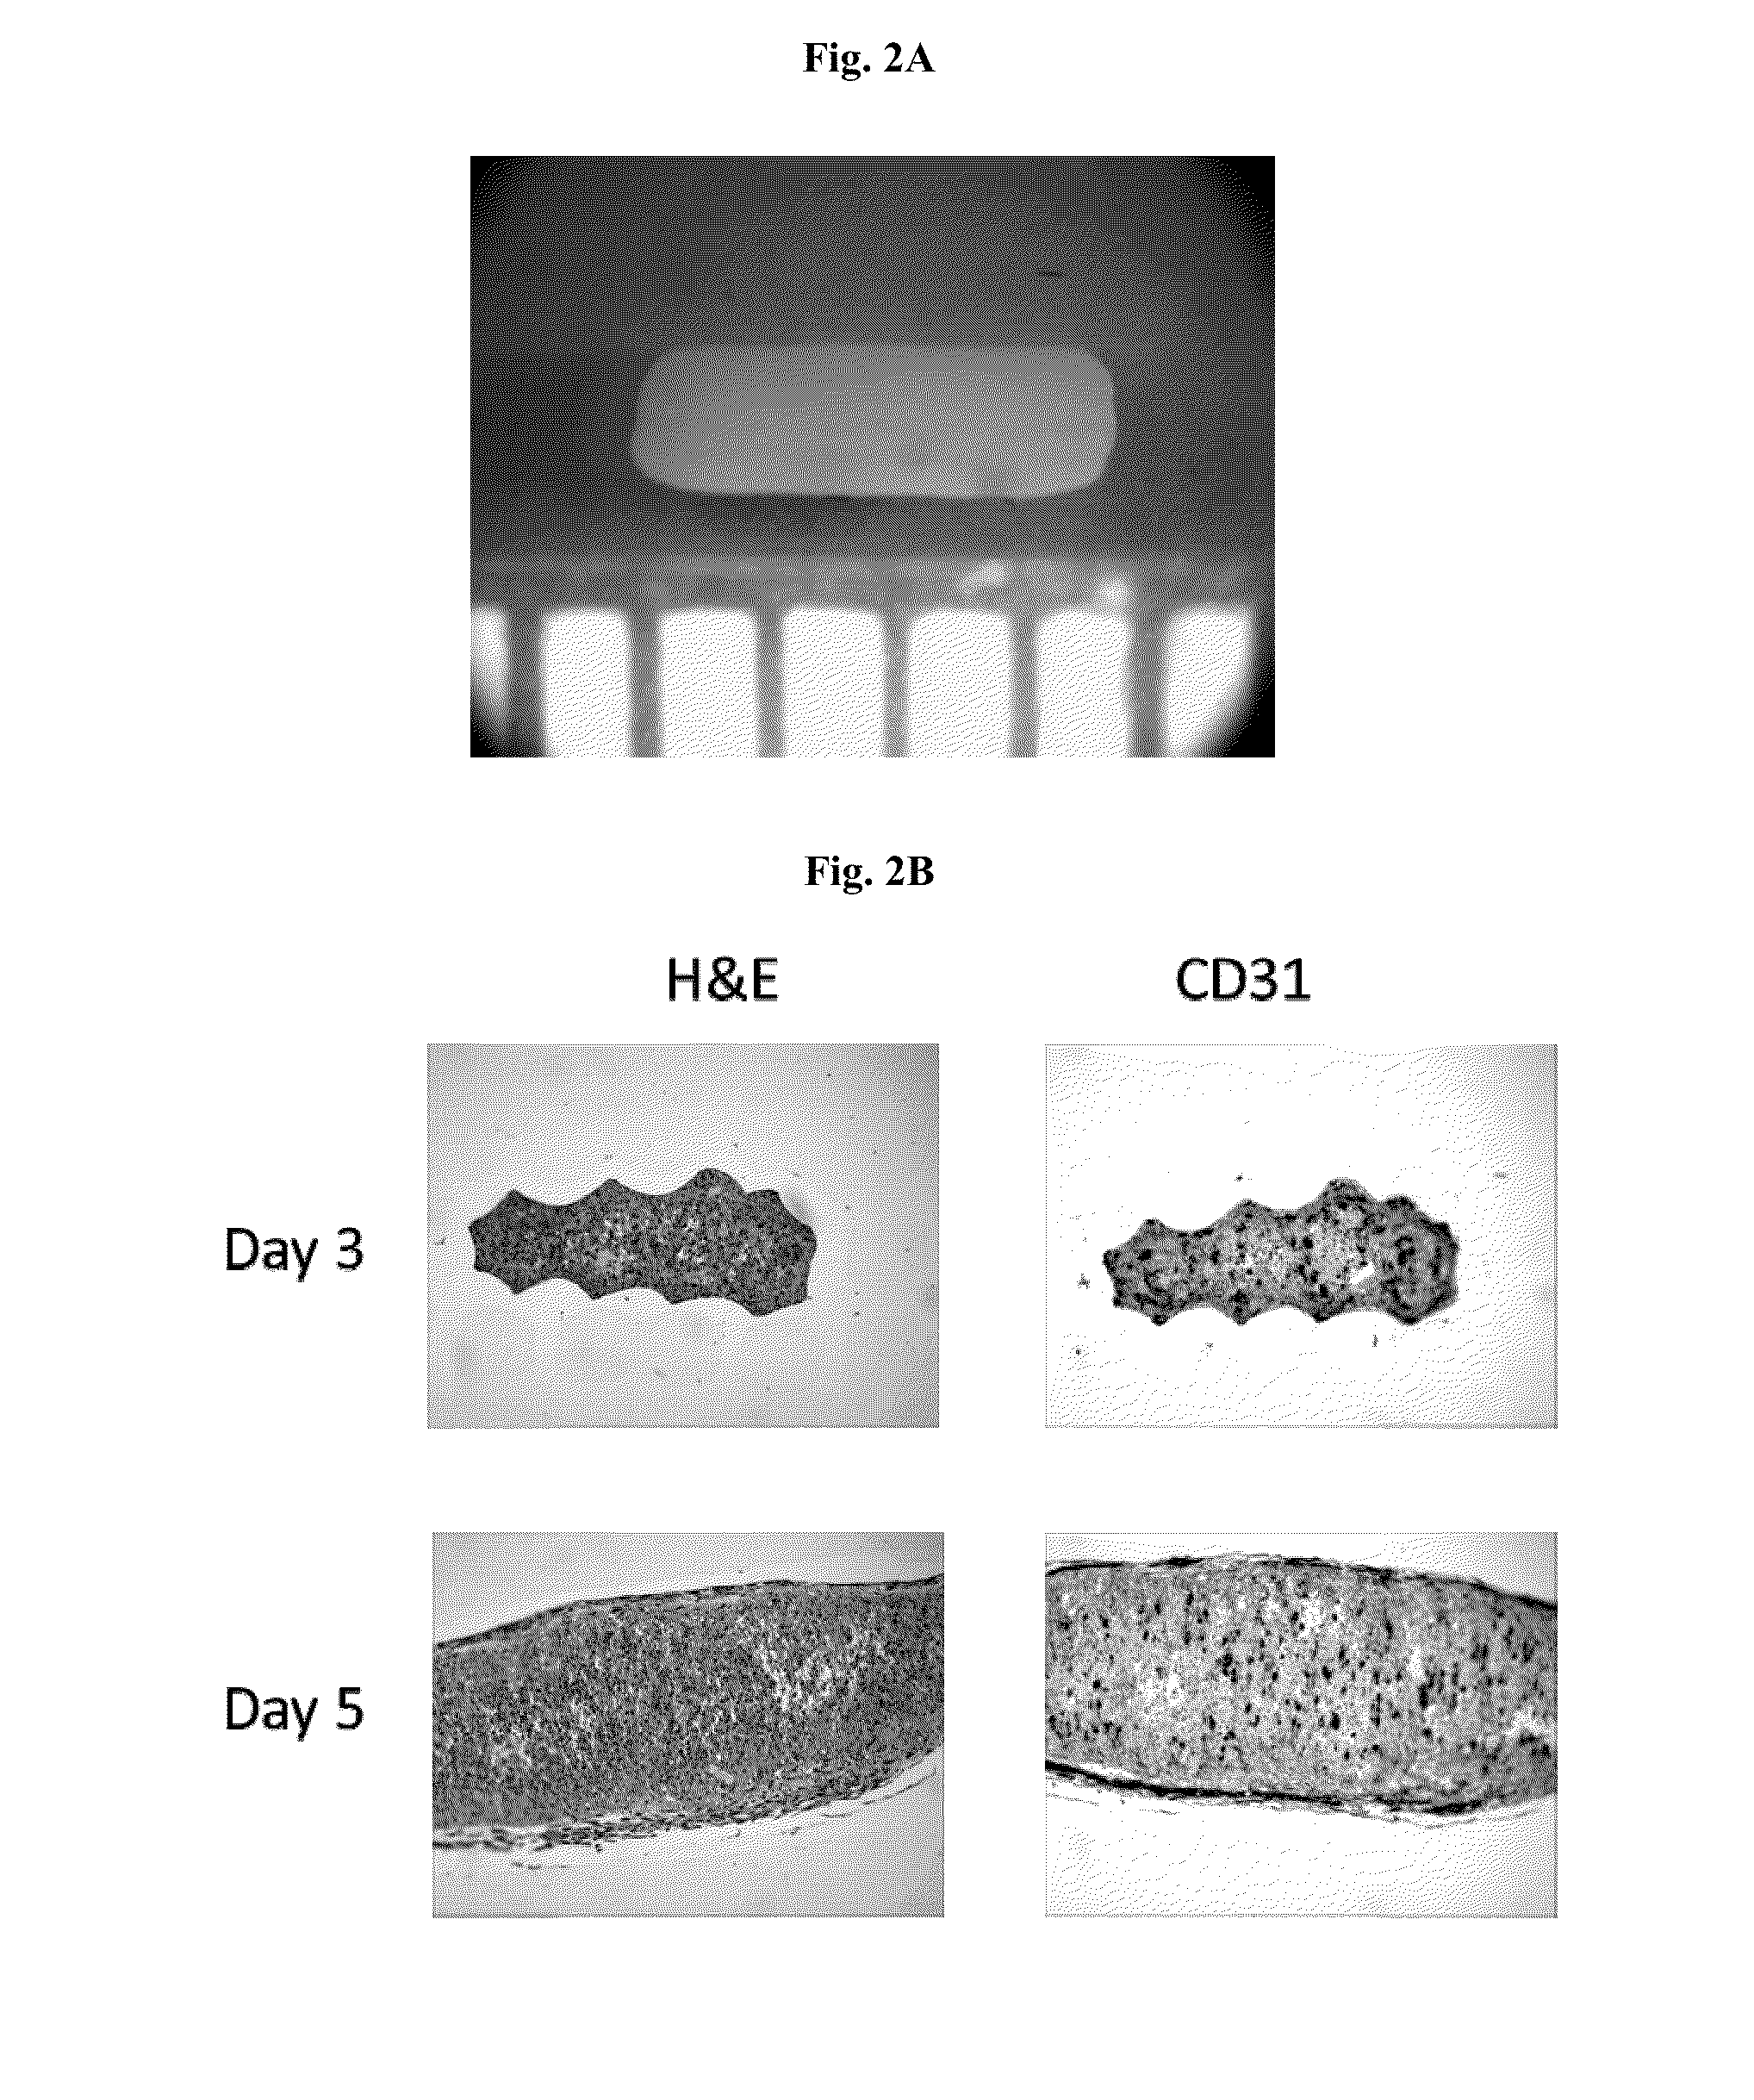 Engineered tissues for in vitro research uses, arrays thereof, and methods of making the same